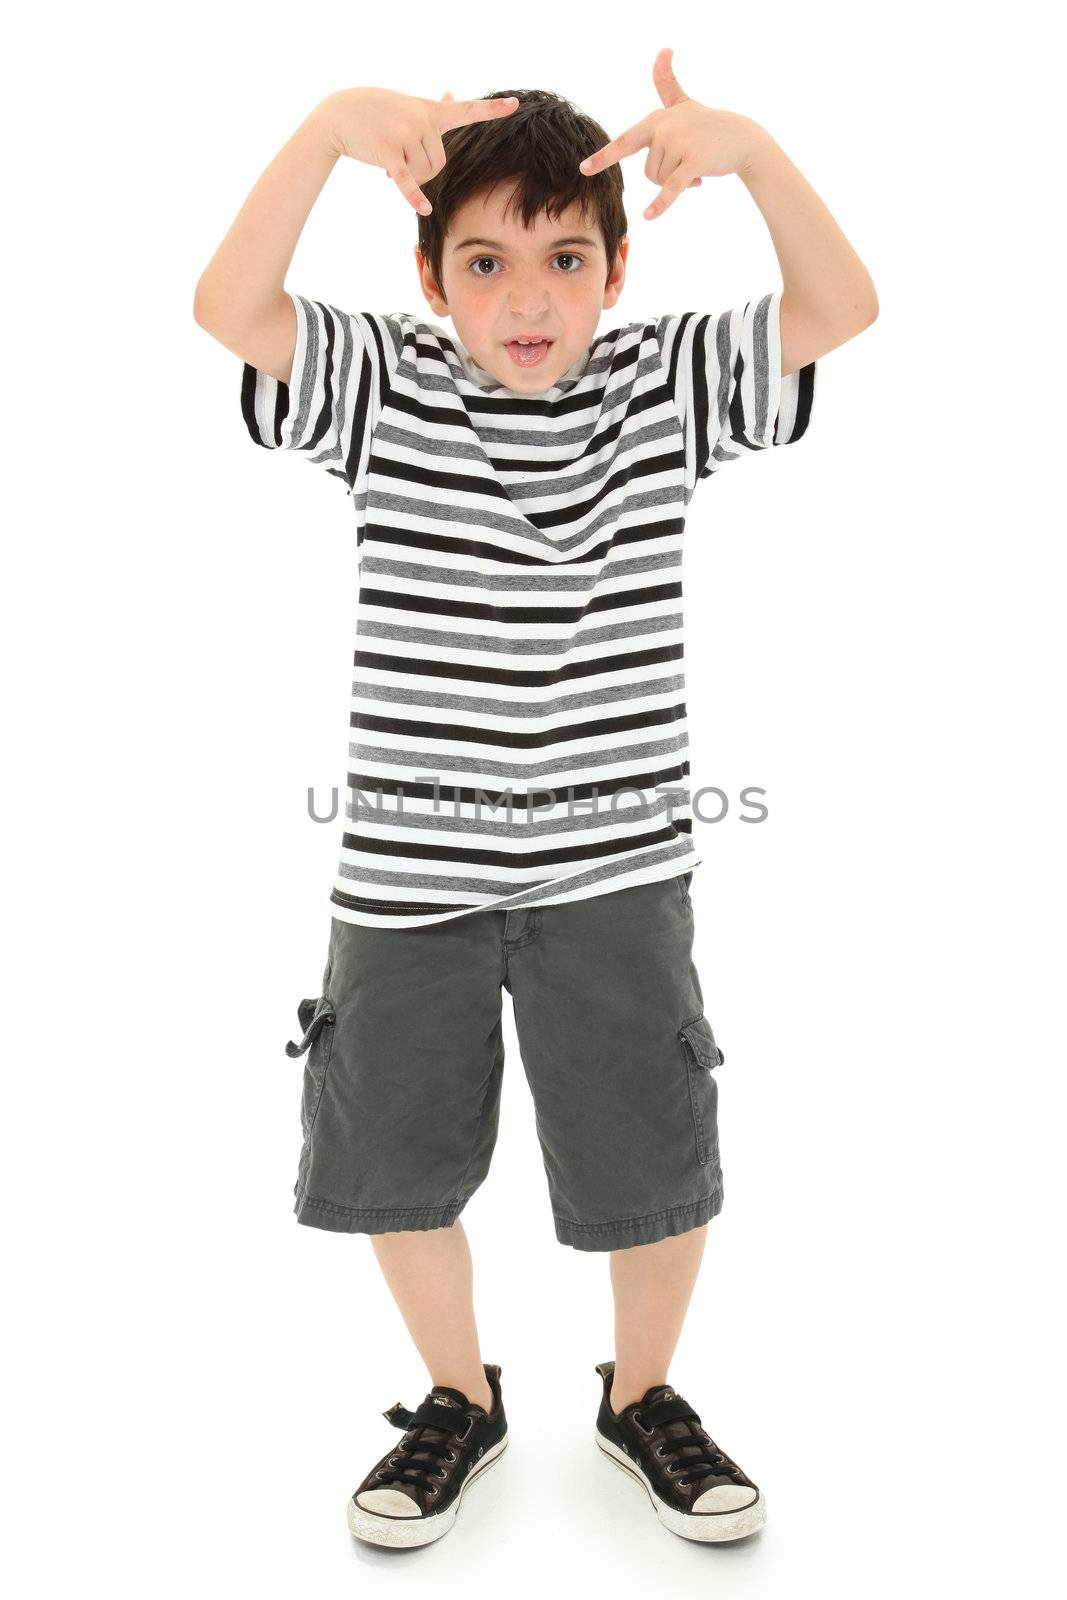 Adorable 8 year old boy making silly faces and gestures over white background.